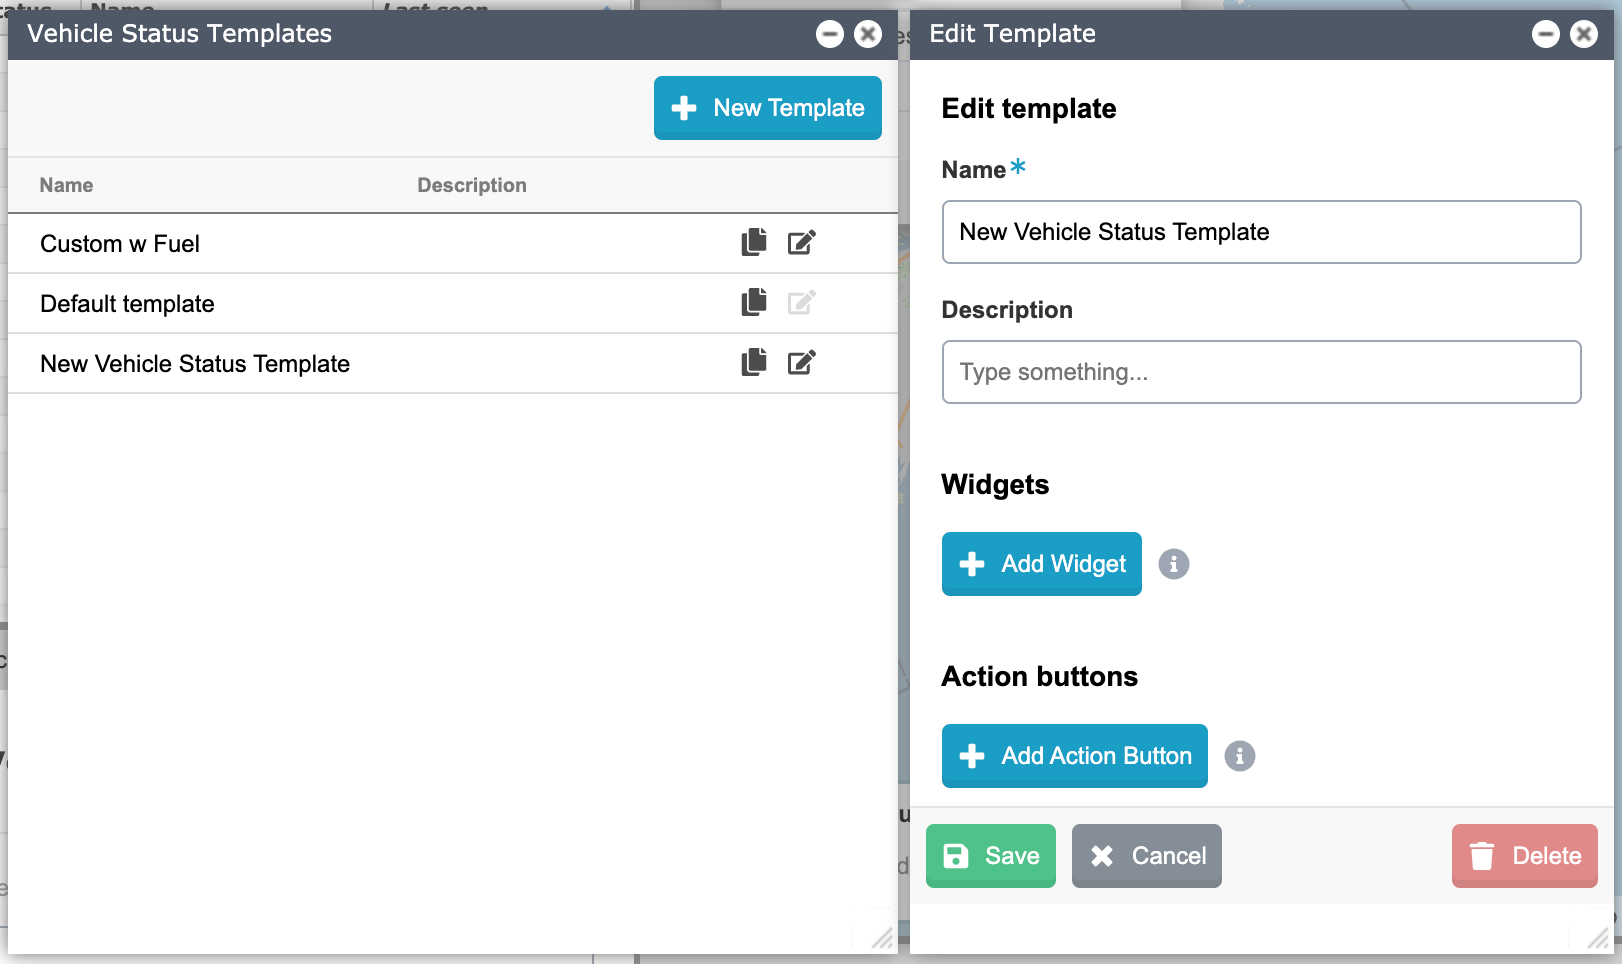 Workflow to edit or create a new vehicle status template.